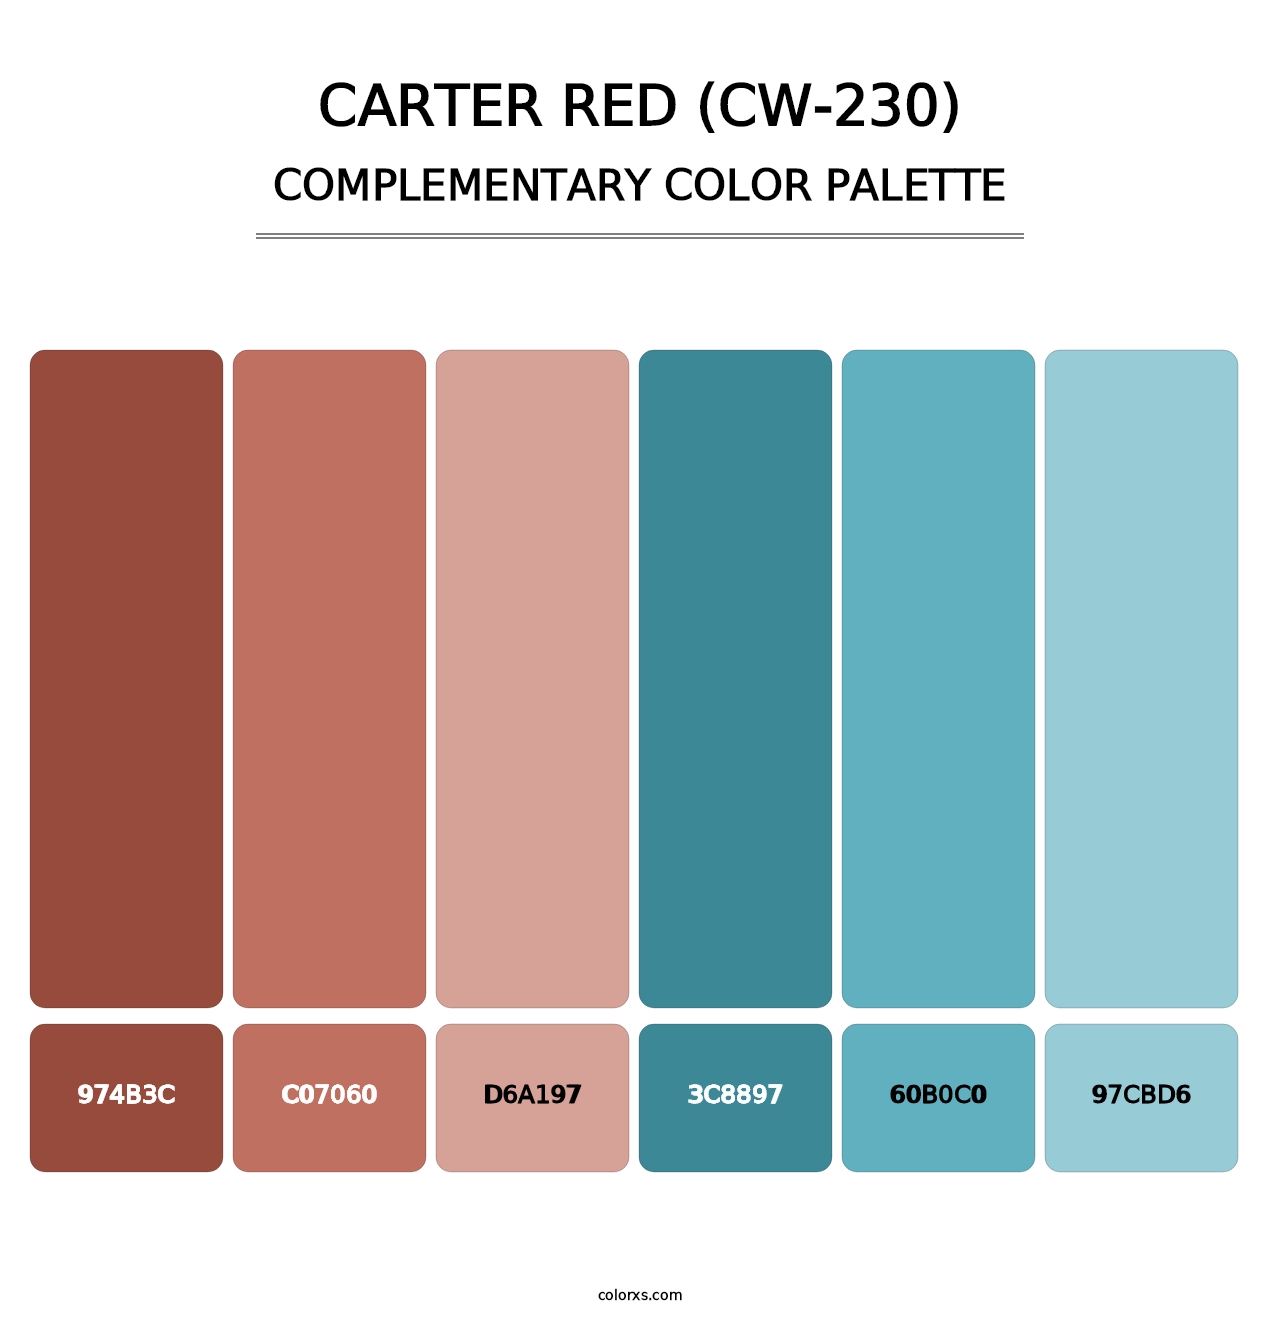 Carter Red (CW-230) - Complementary Color Palette